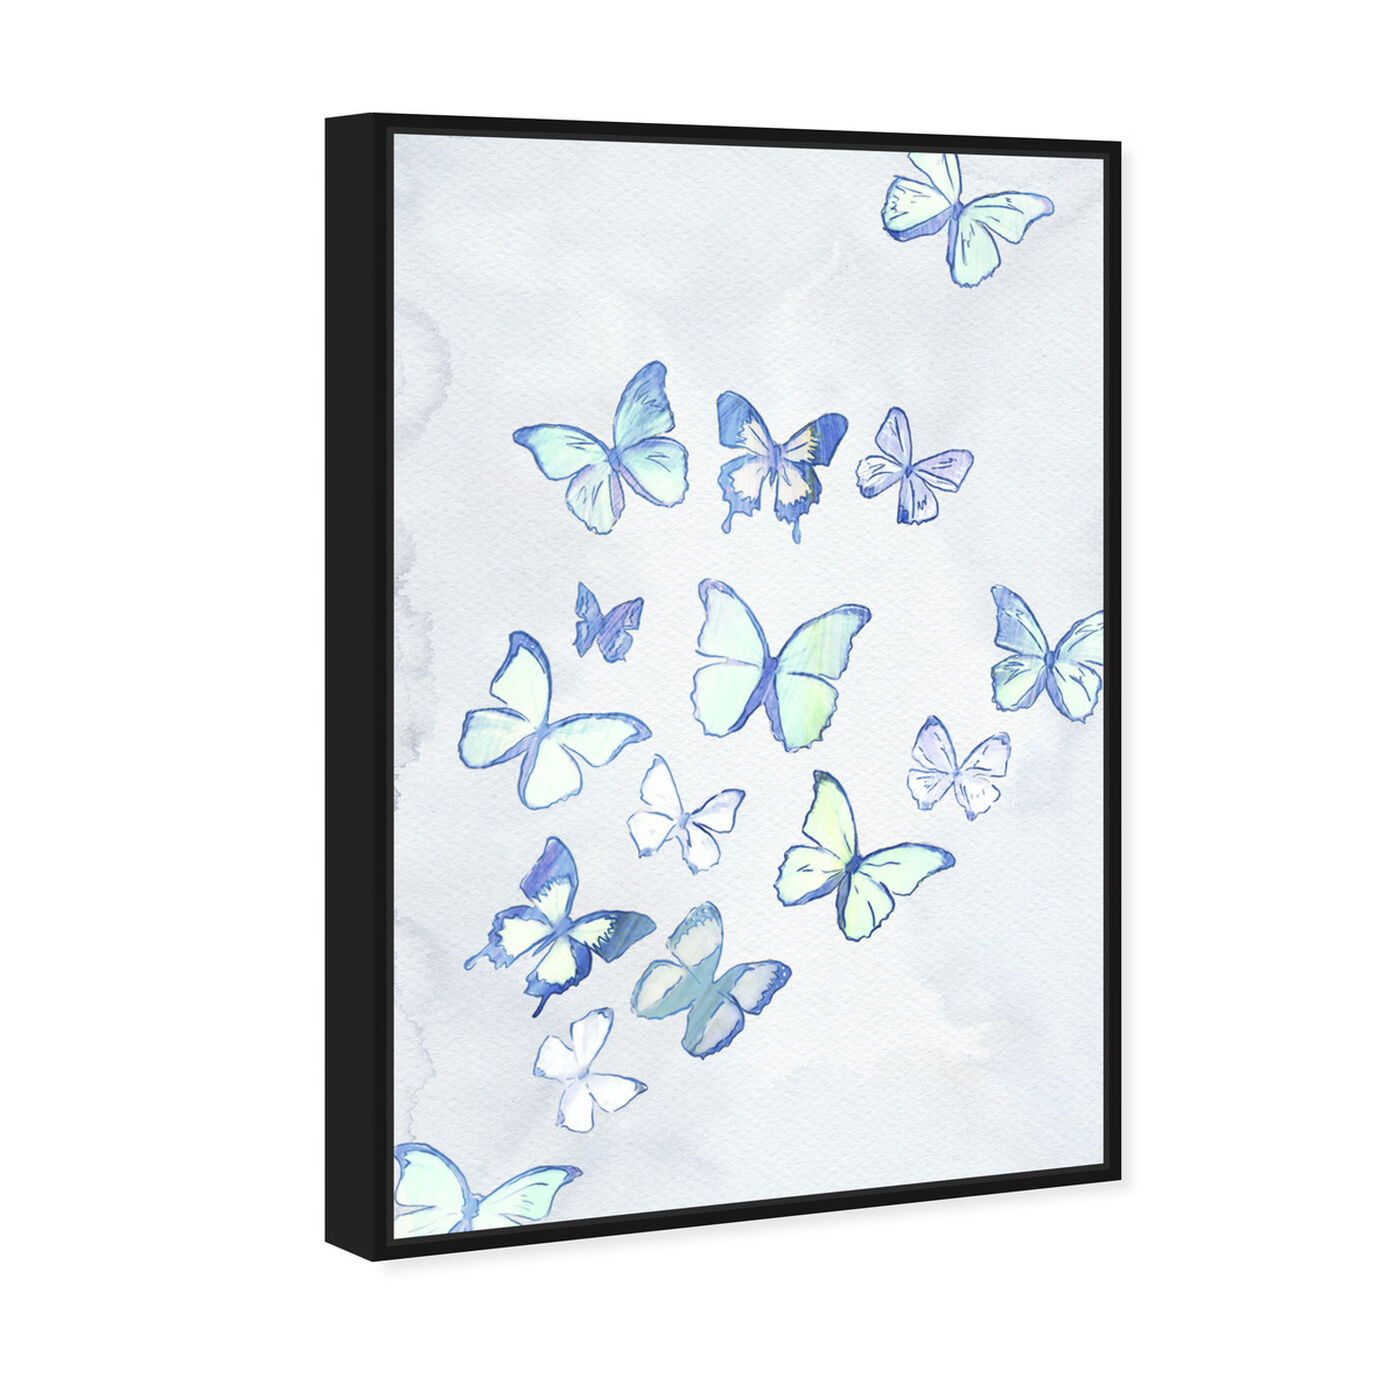 Angled view of Flying Butterflies featuring animals and insects art.